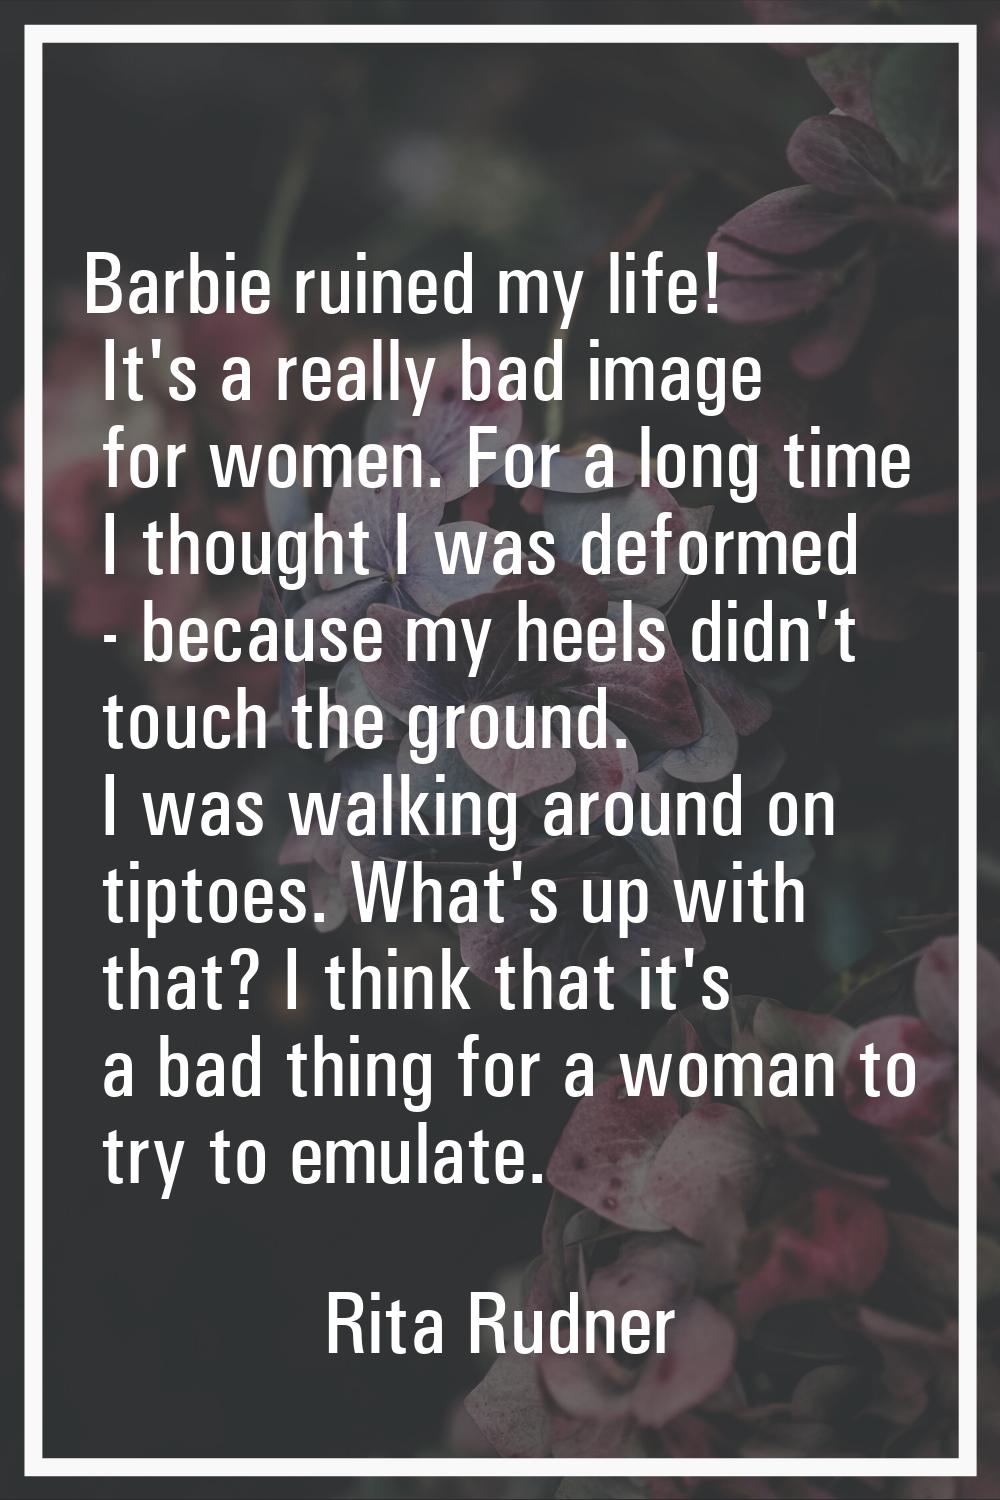 Barbie ruined my life! It's a really bad image for women. For a long time I thought I was deformed 